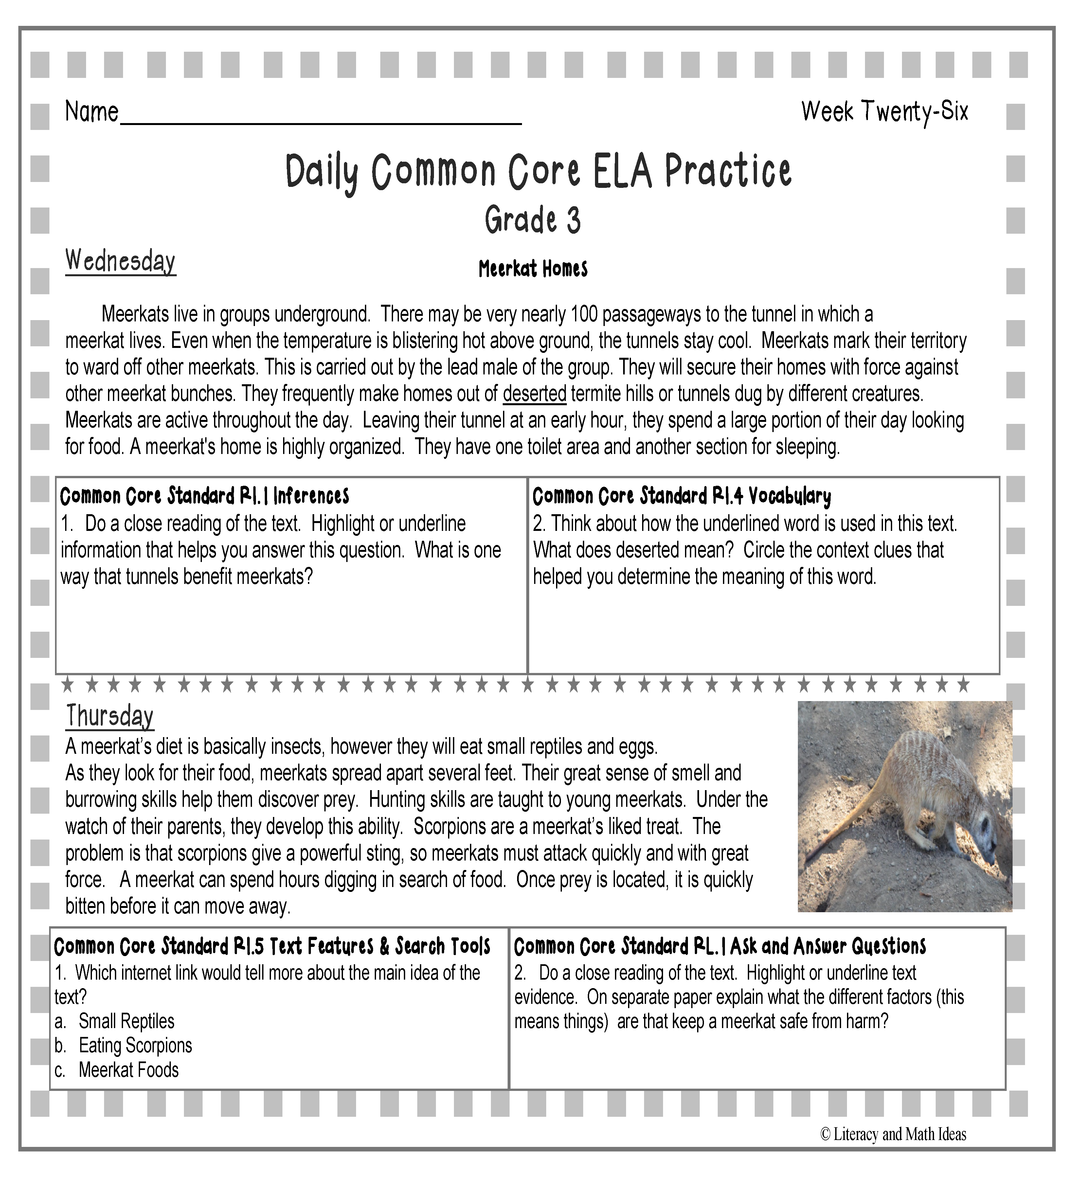 Grade 3 Daily Common Core Reading Practice Weeks 26-30